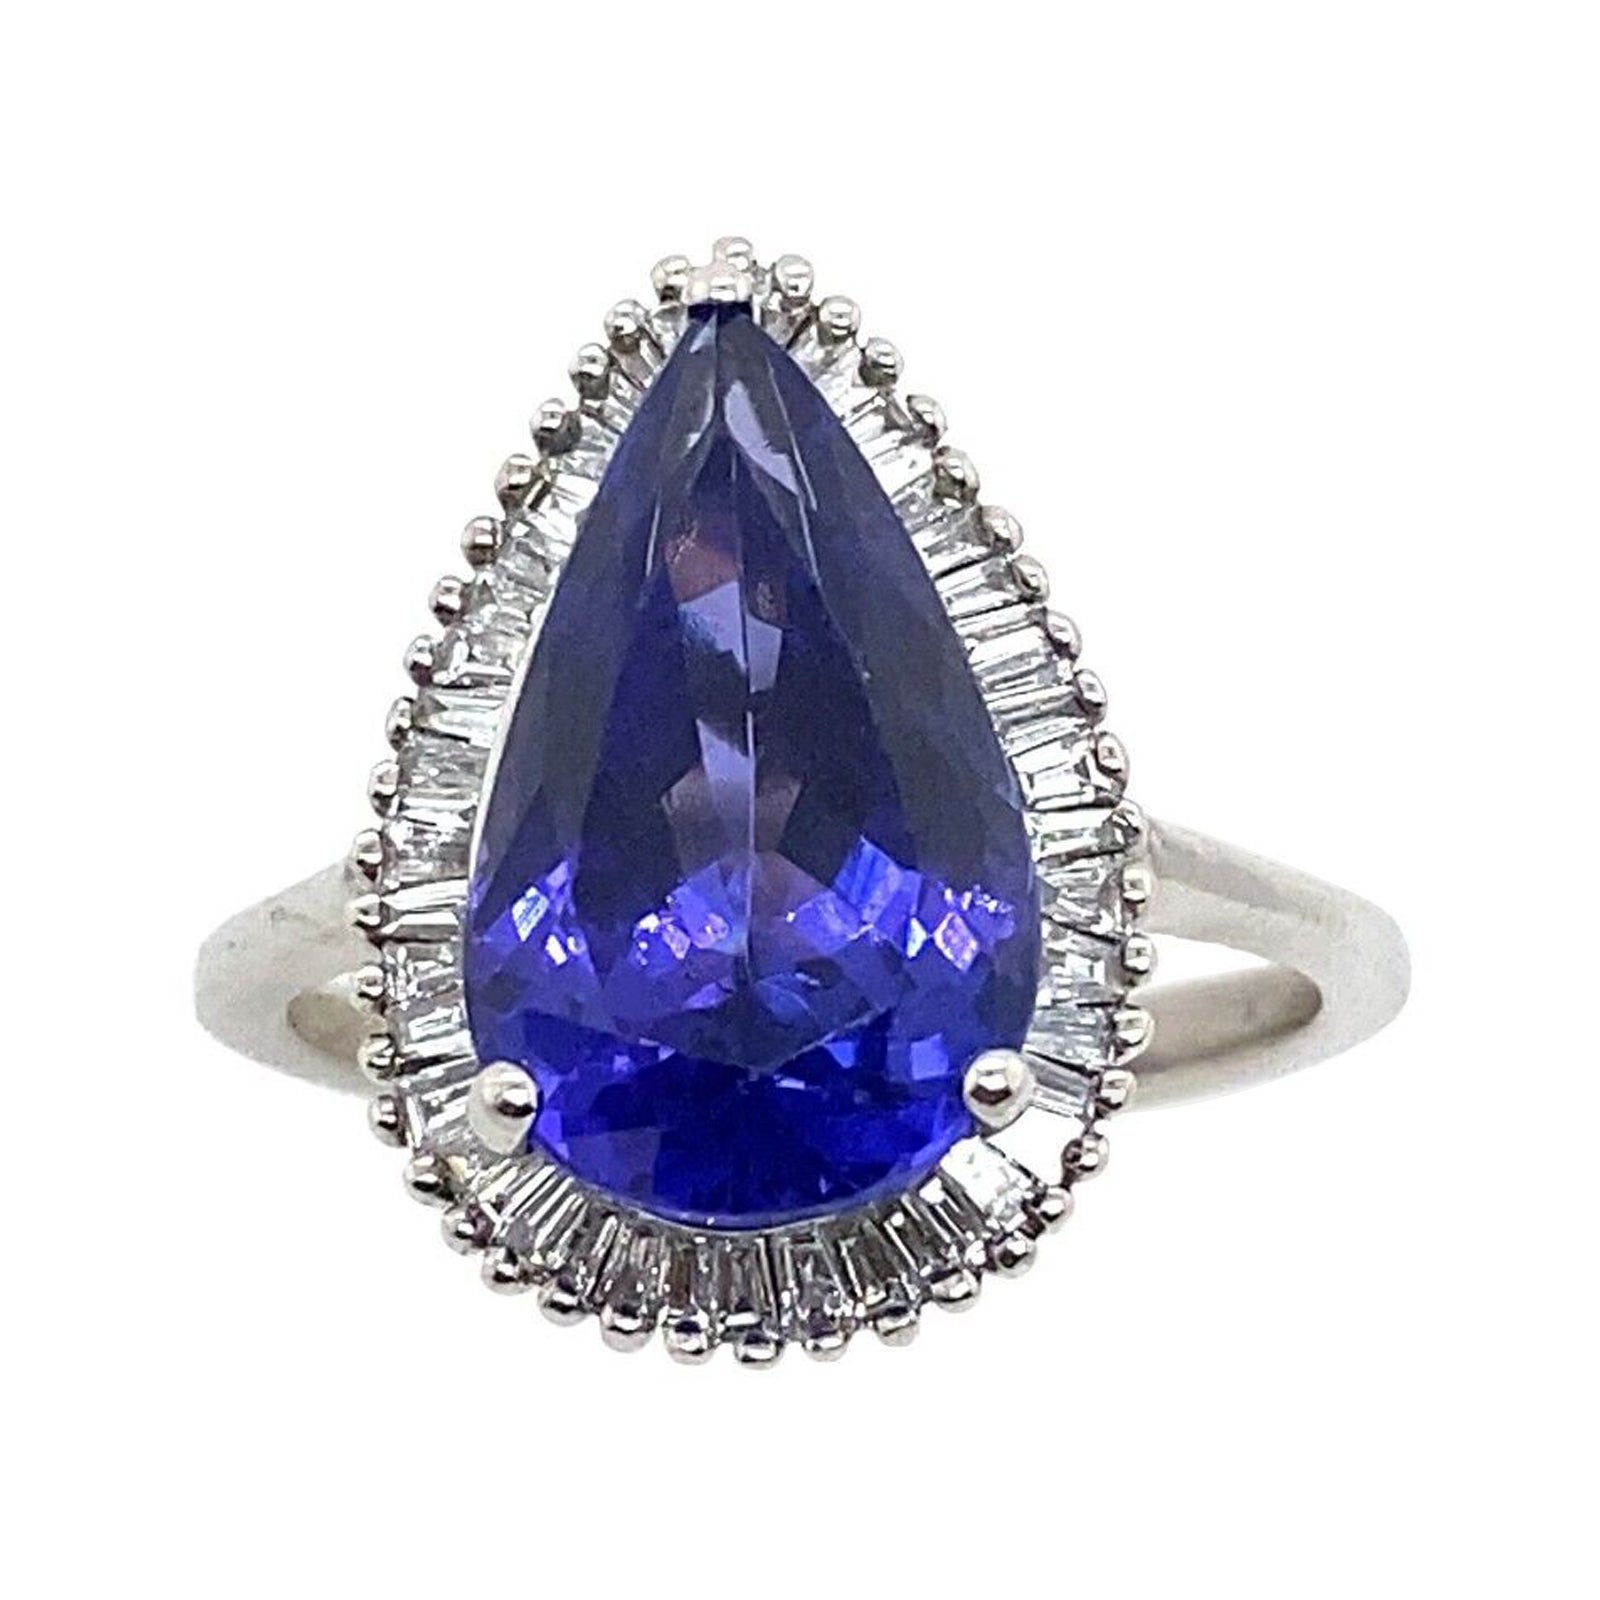 4.85ct Pear Shape Natural Tanzanite Surrounded by 0.42ct of Diamonds Ring